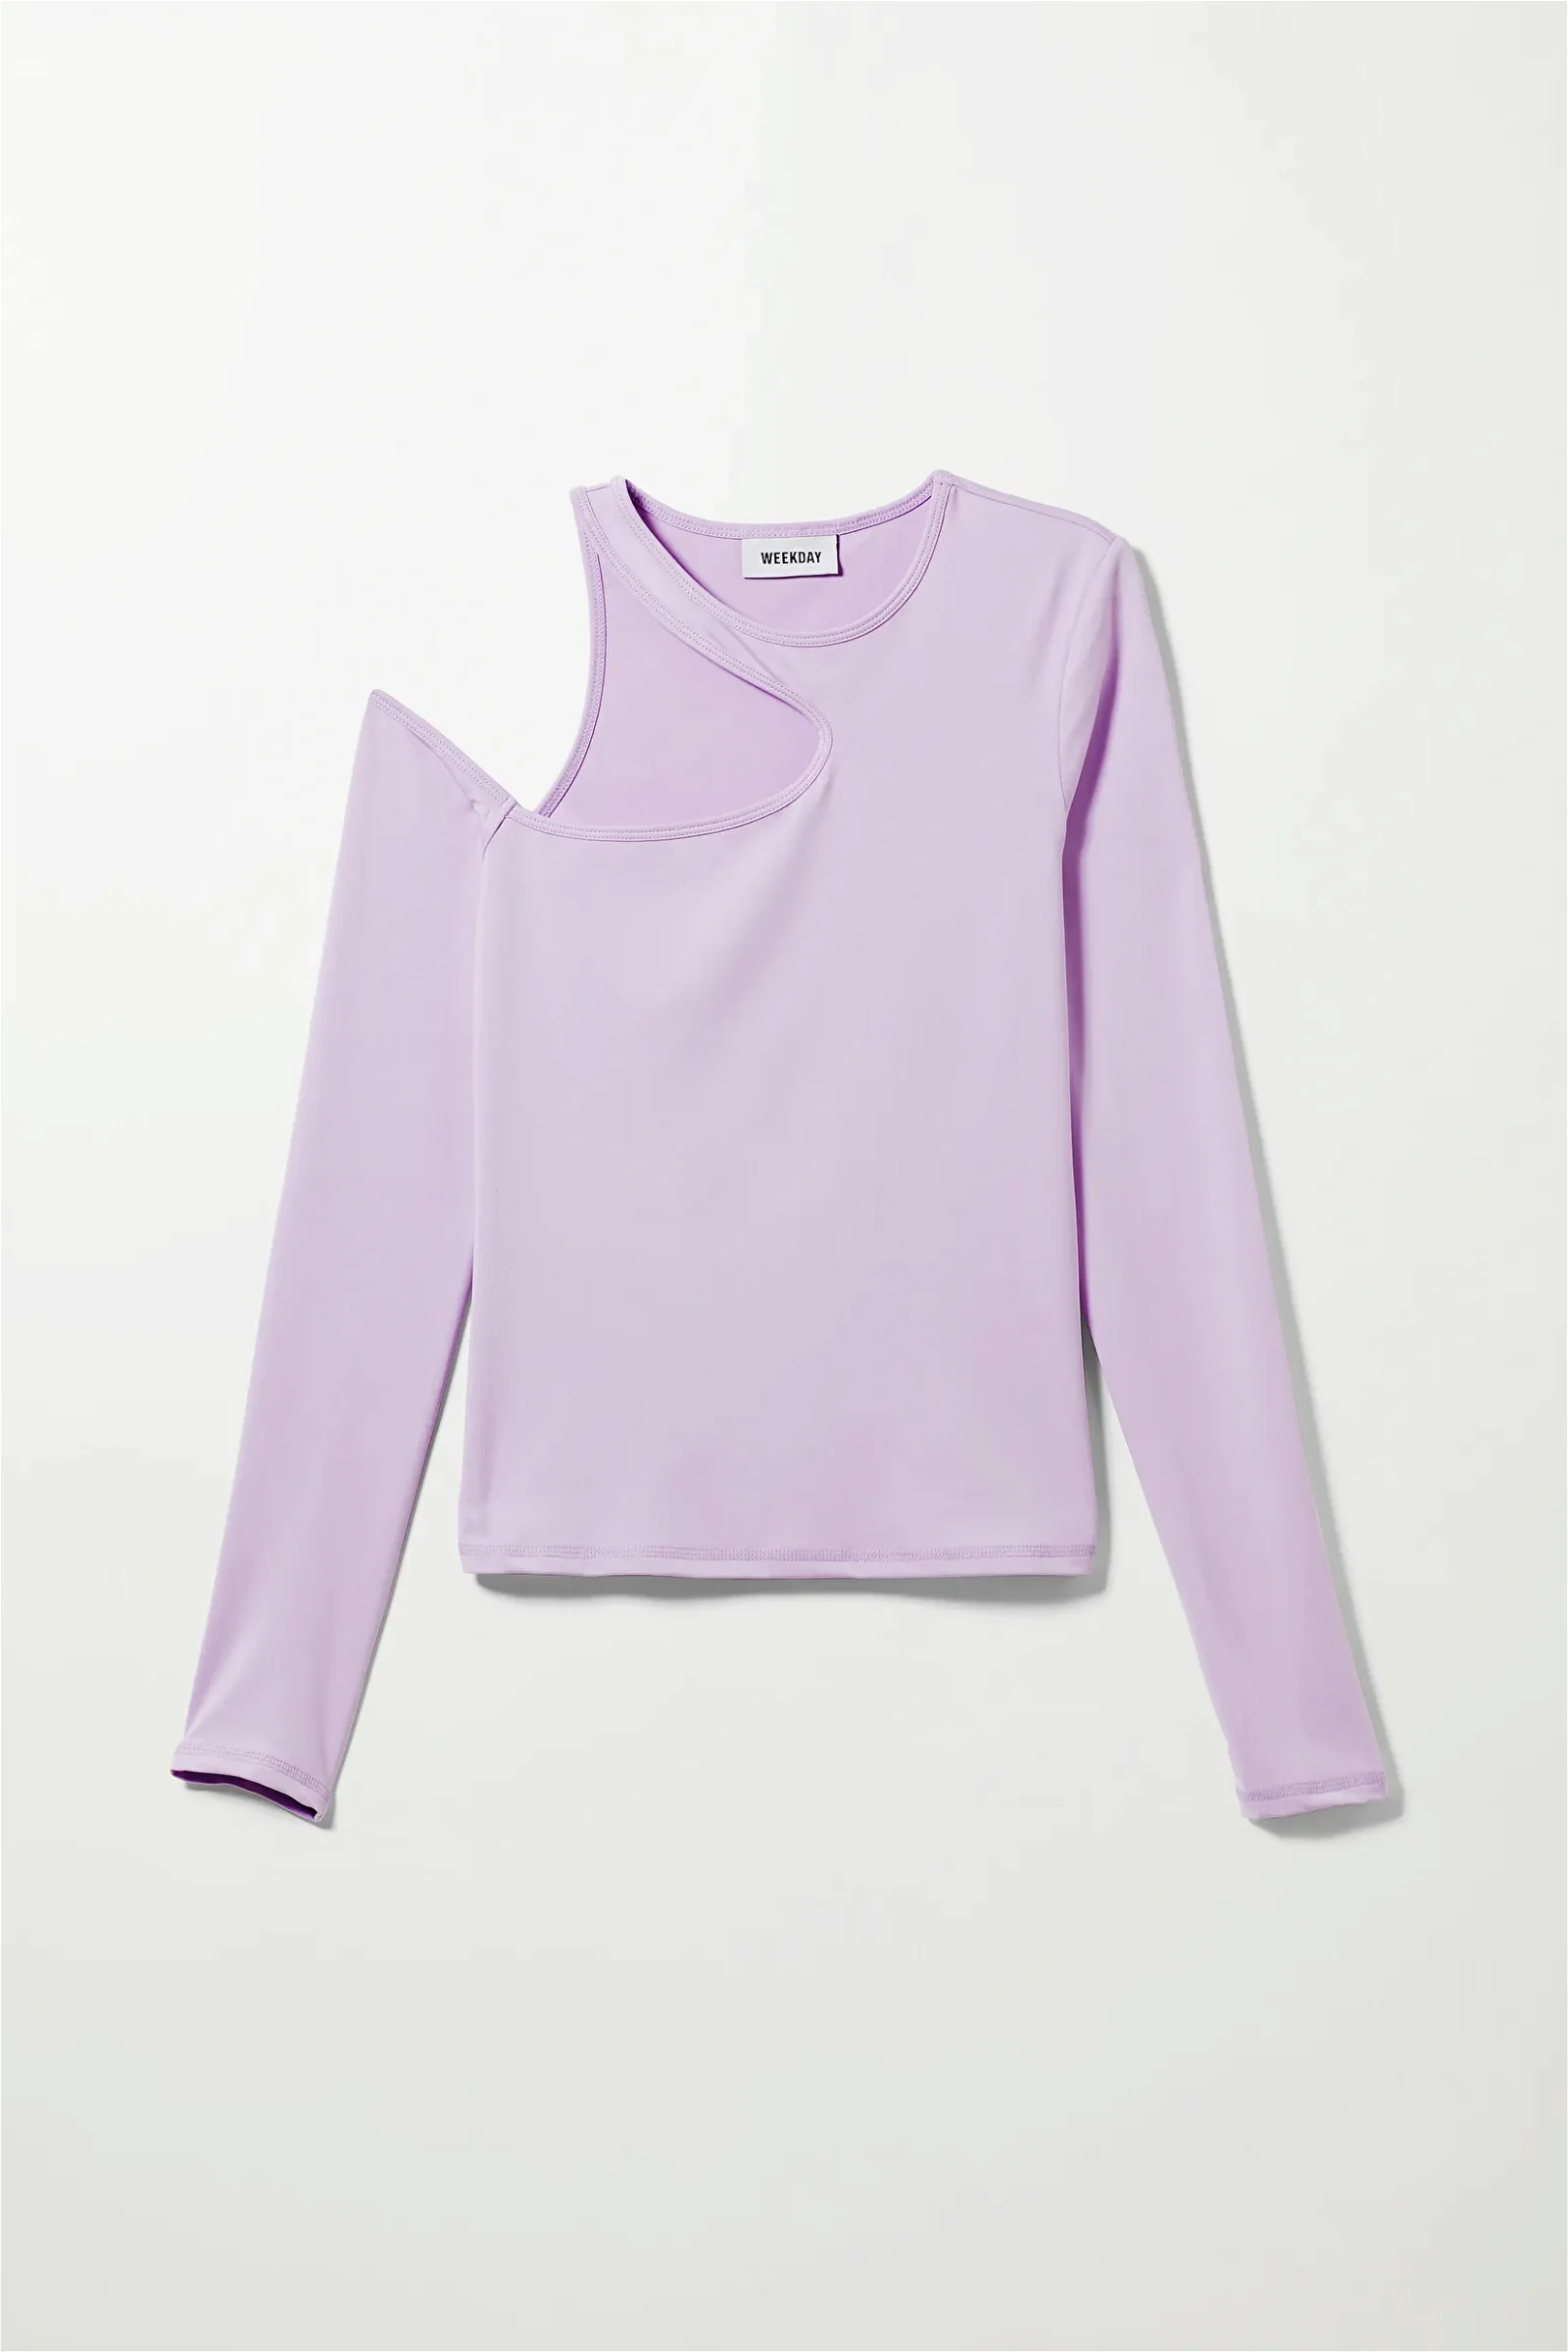 Ambria | Lilac WEEKDAY Sleeve Endource Long in